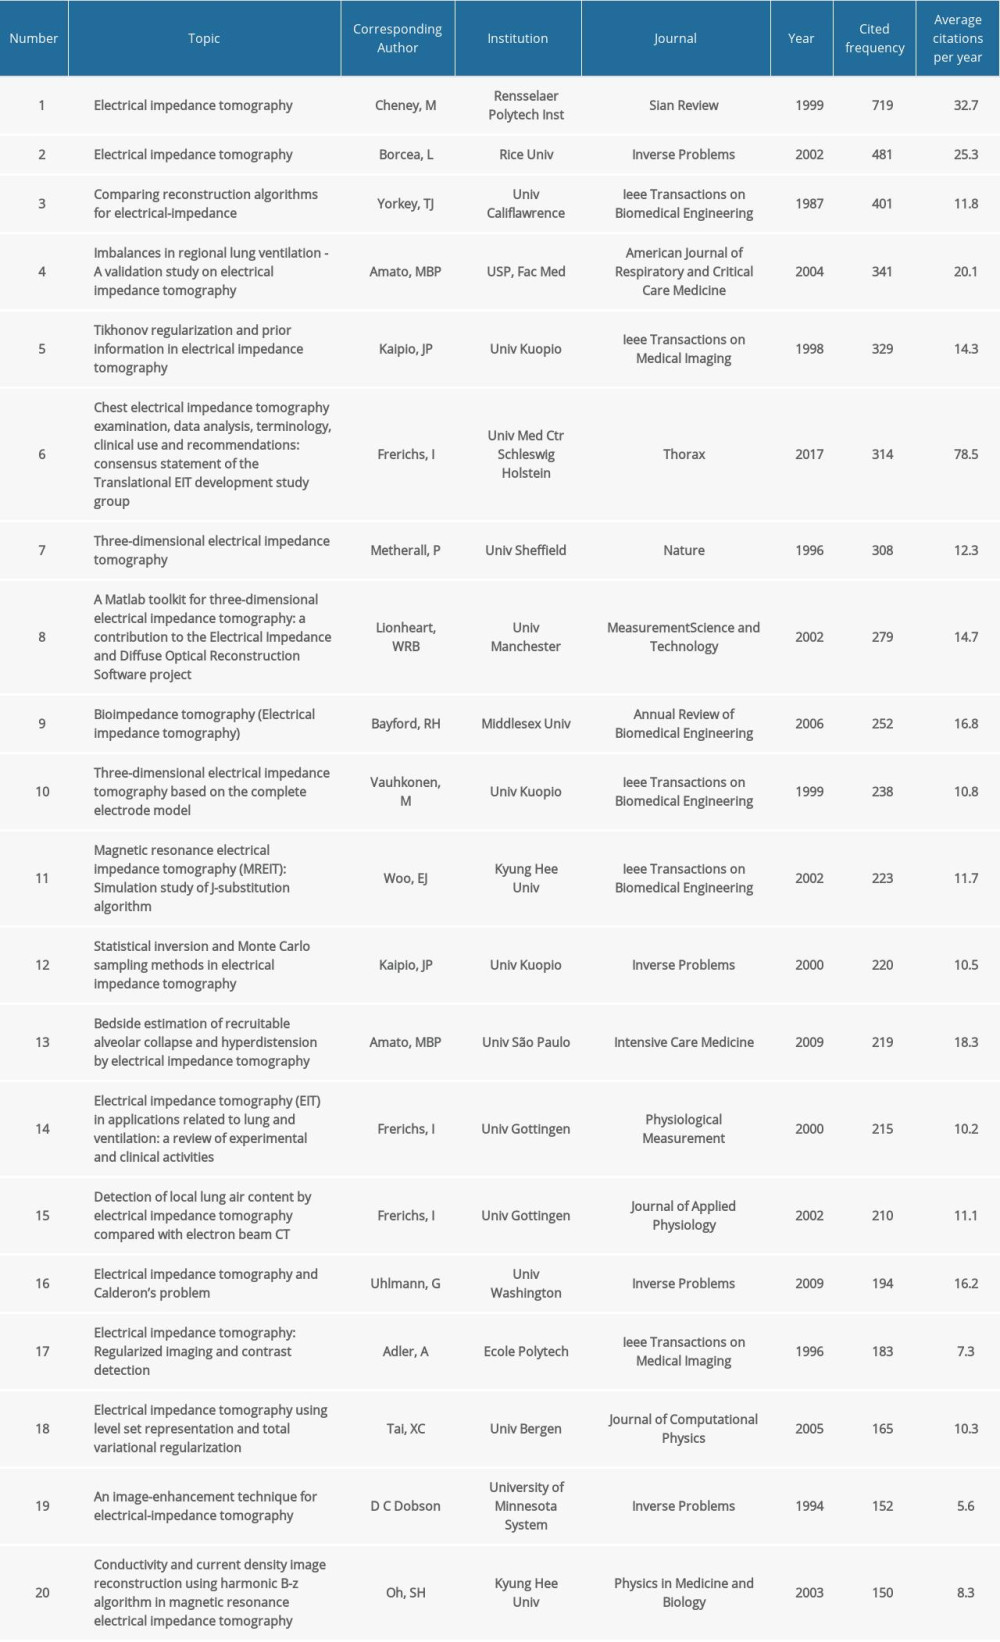 Table of top 20 highly cited articles.